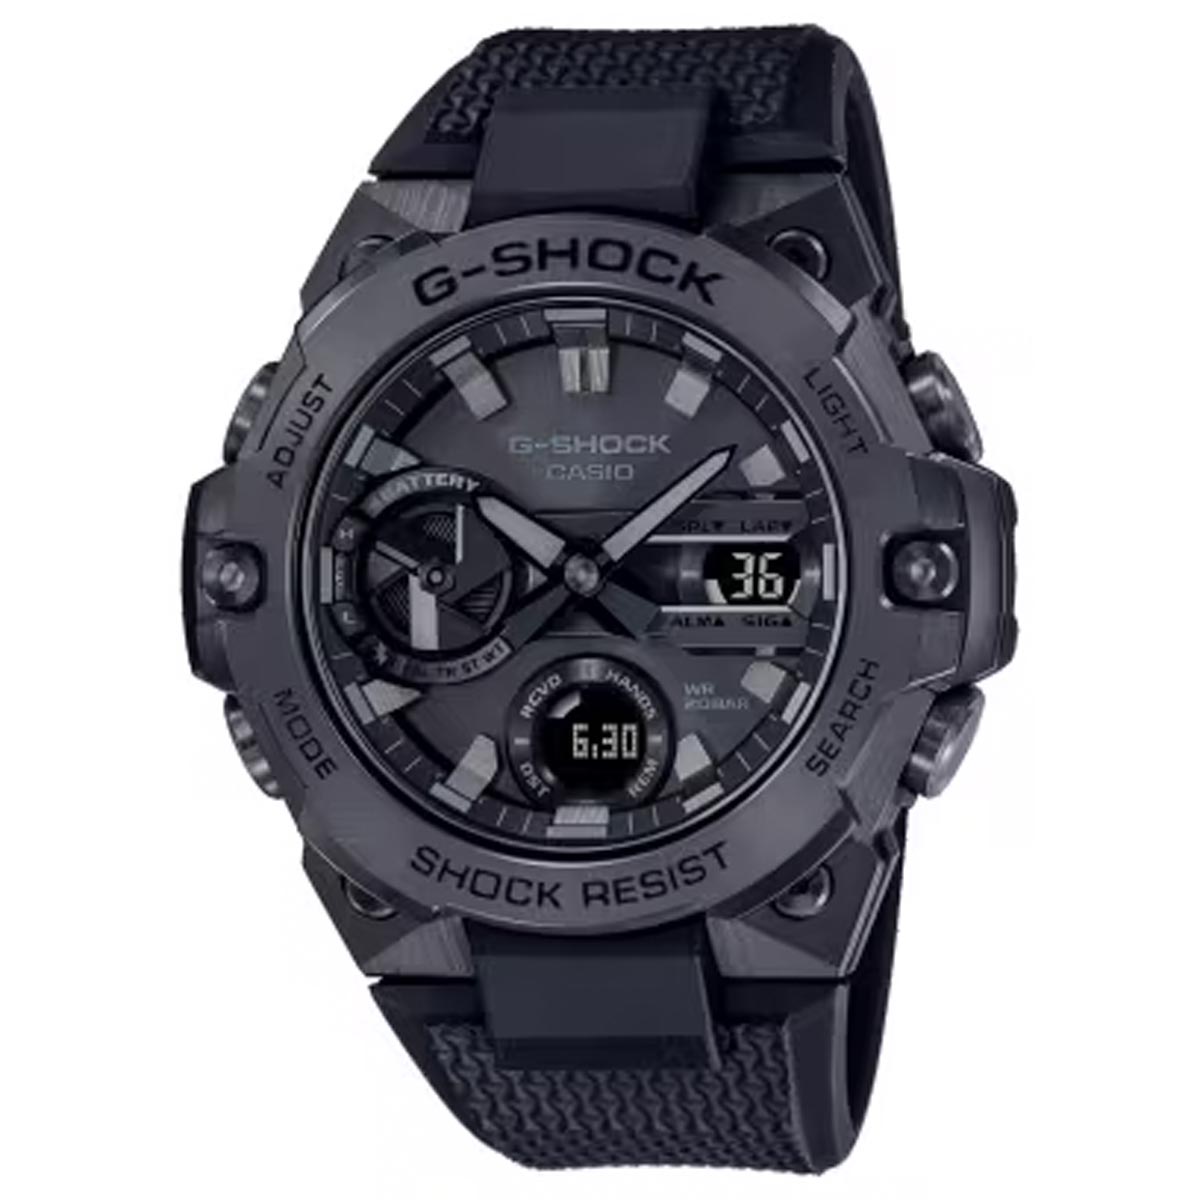 G-Shock GST-B400 Series Mens Watch with Black Dial and Black Resin Strap (solar movement)